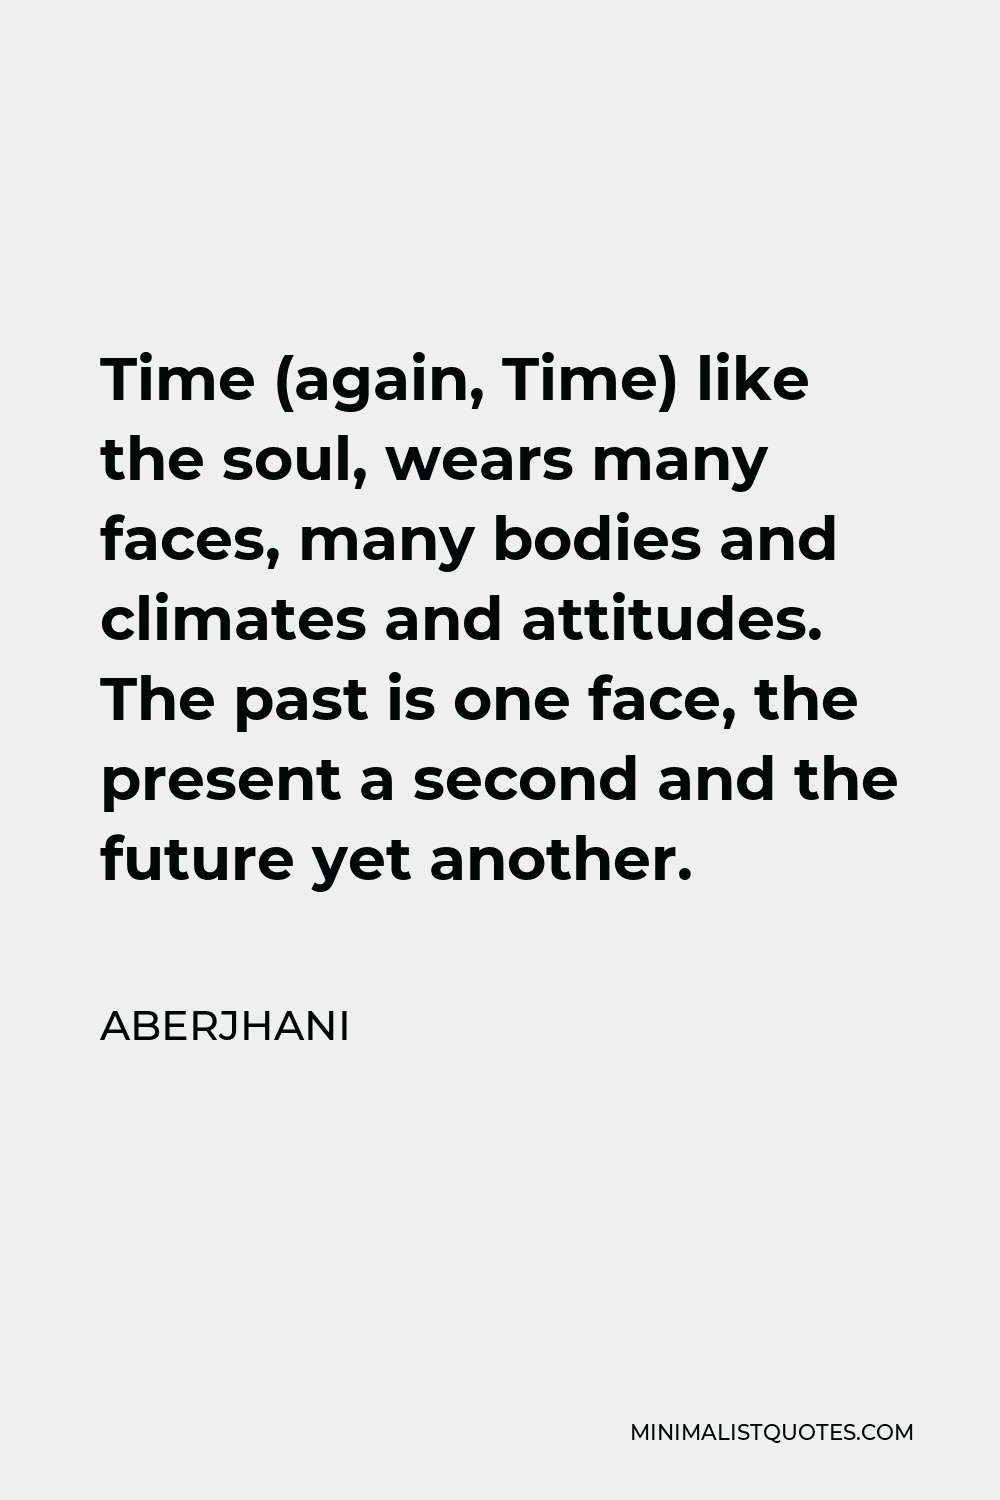 Aberjhani Quote - Time (again, Time) like the soul, wears many faces, many bodies and climates and attitudes. The past is one face, the present a second and the future yet another.